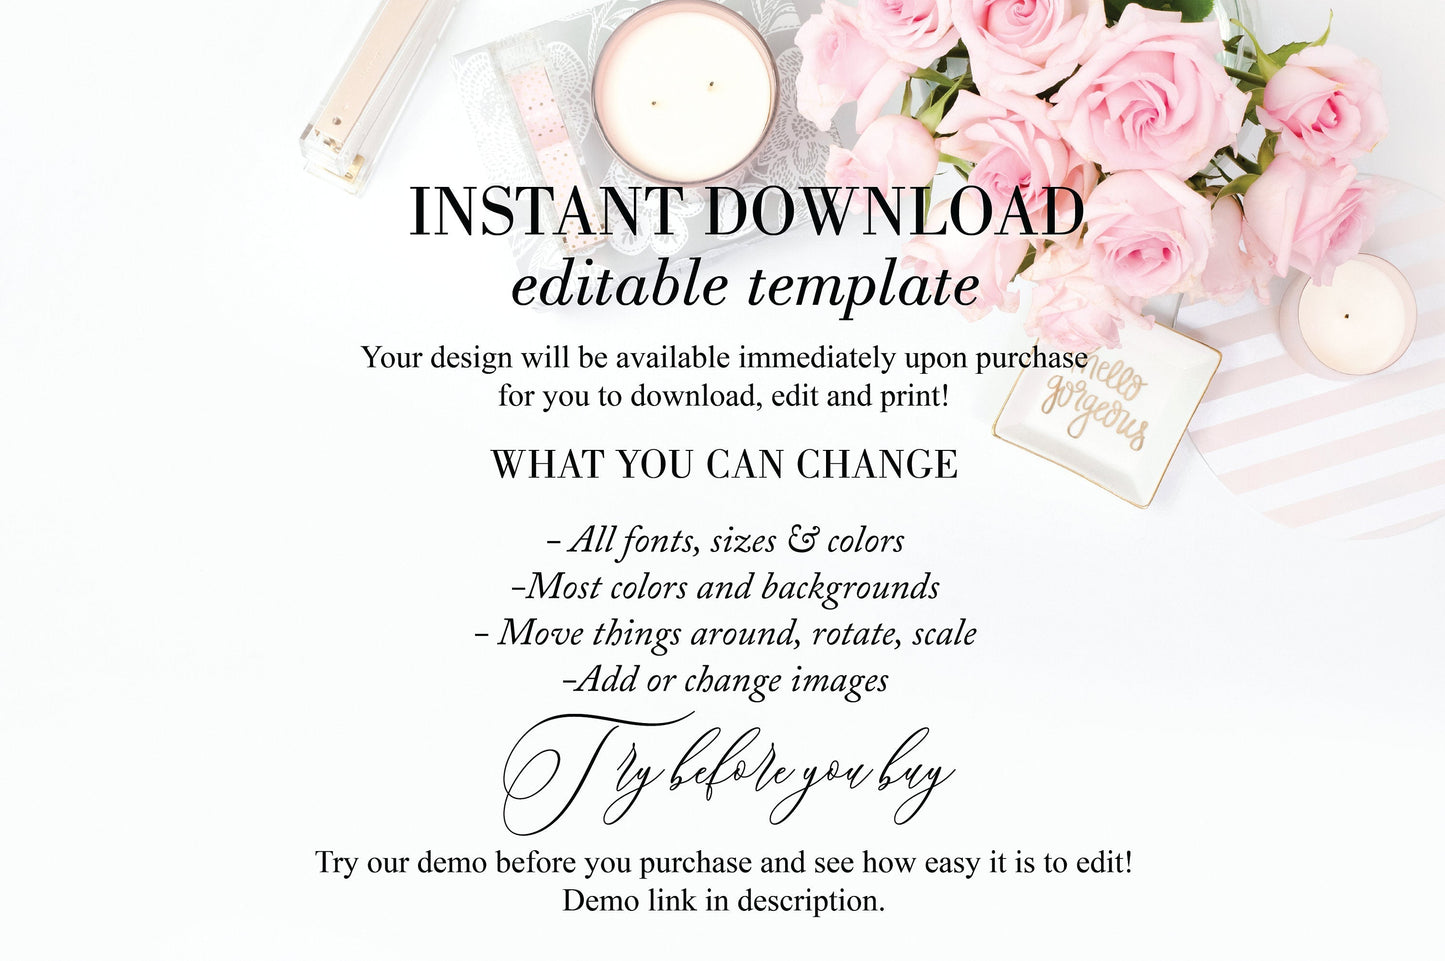 Printable Floral Thank You Tags Template Wedding Bridal Shower Instant Download 100% Editable - Harper TAGS | TY | INSERTS SAVVY PAPER CO